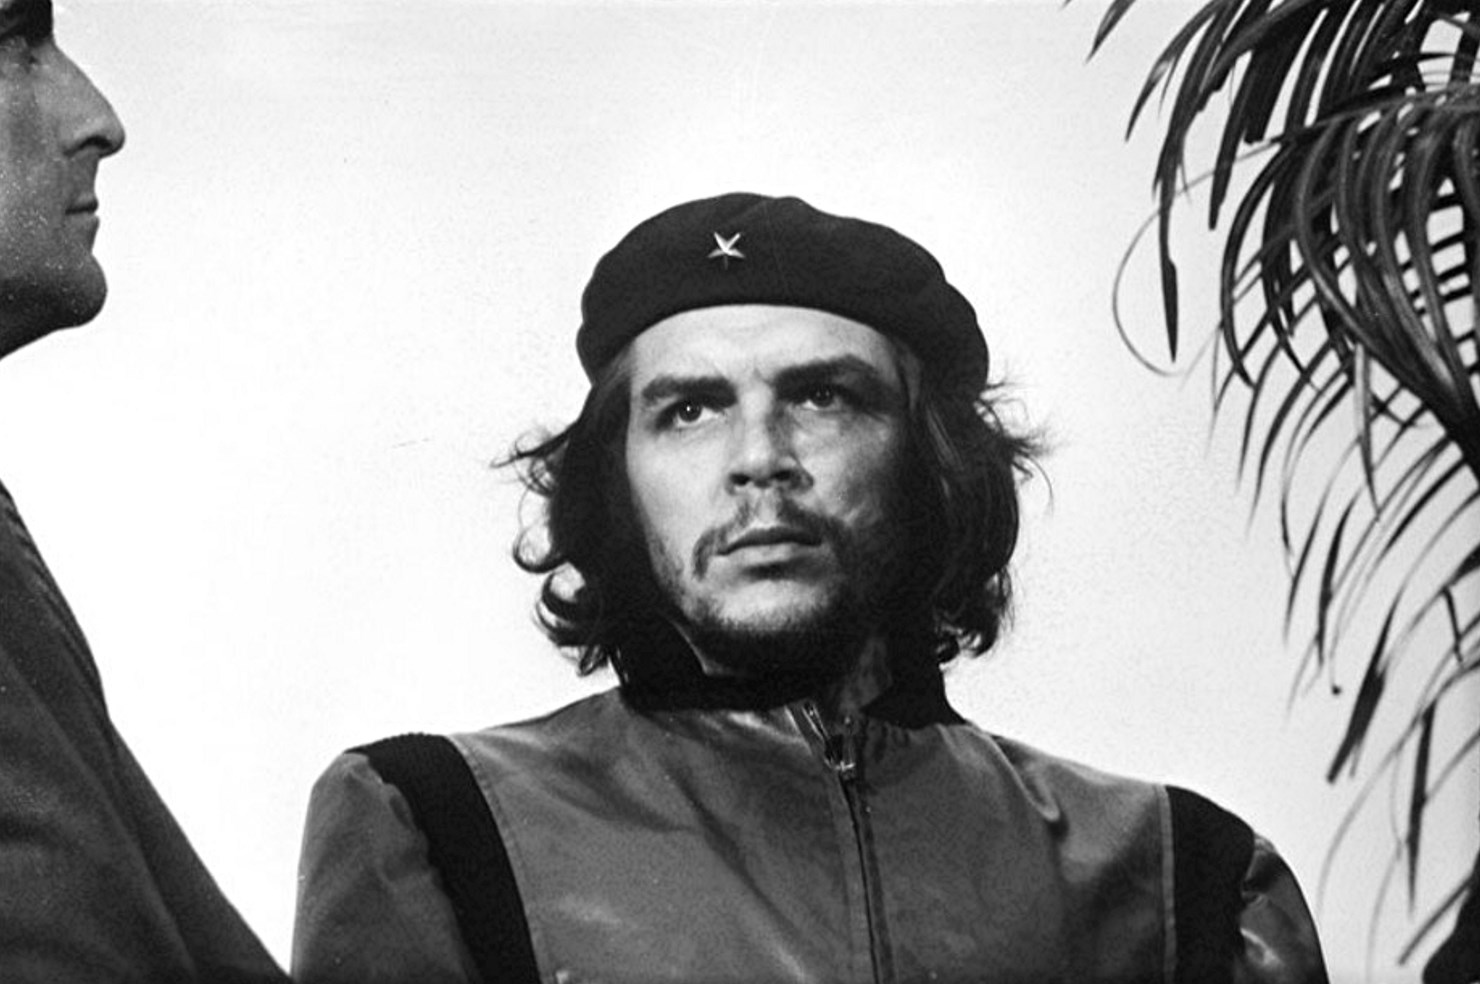 Guerrillero Heroico - This photo of Cuban revolutionary Che Guevara is one of the most reproduced and recognizable images of all time, but when it was taken it was basically an afterthought. Photographer Alberto Korda had been in Cuba to cover the funeral of the victims of a ship explosion in Havana Harbor, and he focused on Fidel Castro and his indictment of the US in the wake of the tragedy. He shot two photos of Guevara, Castro’s young ally, but they went unpublished by his newspaper. It wasn’t until after Guevara was killed in Bolivia almost seven years later, when he became embraced as a martyr for the revolution, that Korda’s image of him became the revolution’s most persistent symbol.